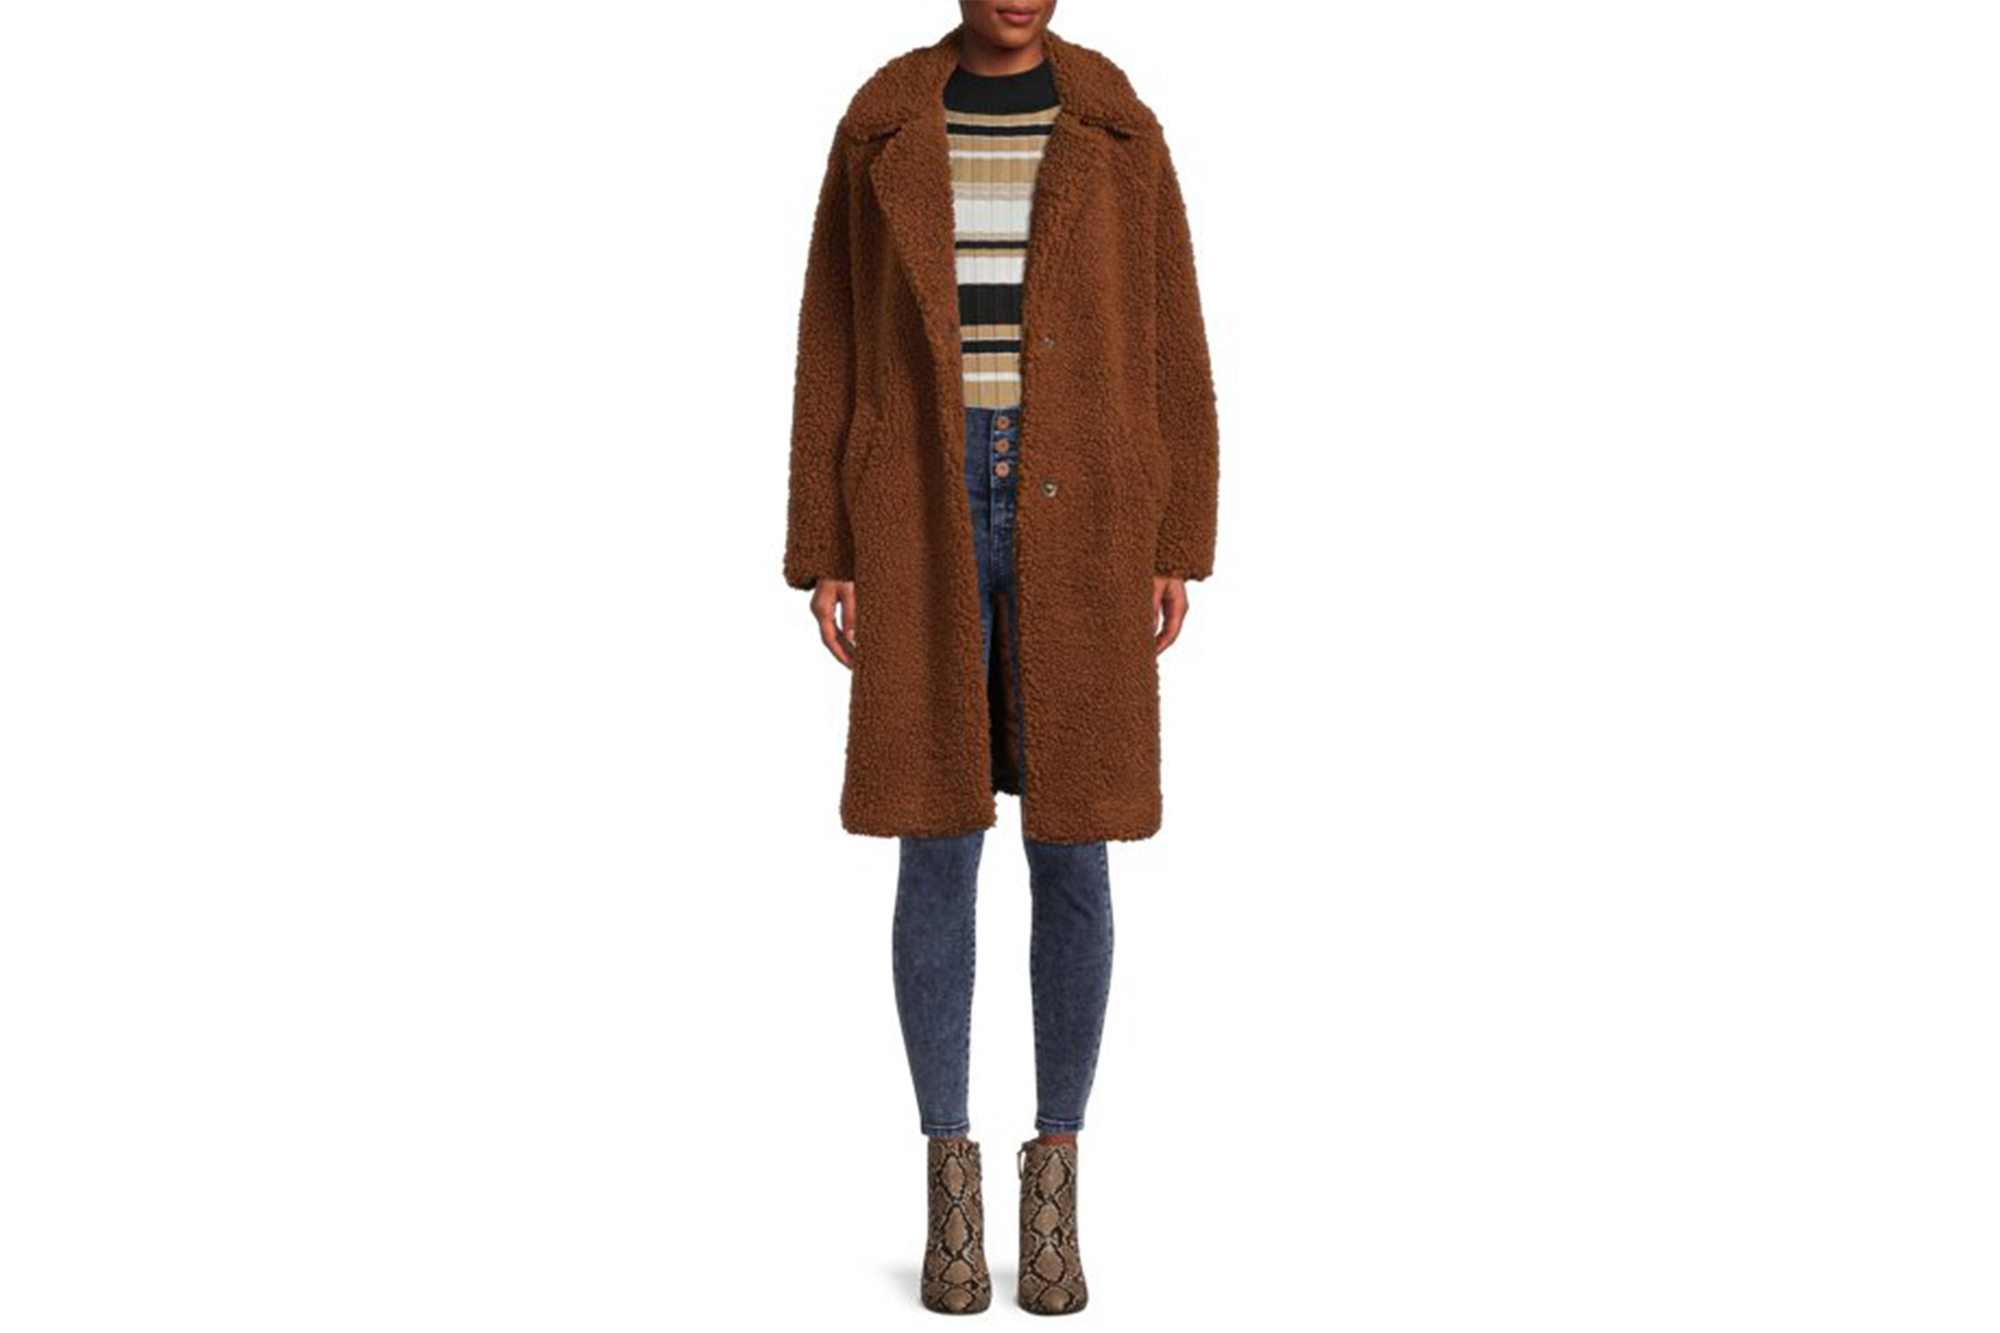 Lucky Brand Fuzzy Faux-Sherpa Coat Is Nearly 75% Off at Walmart